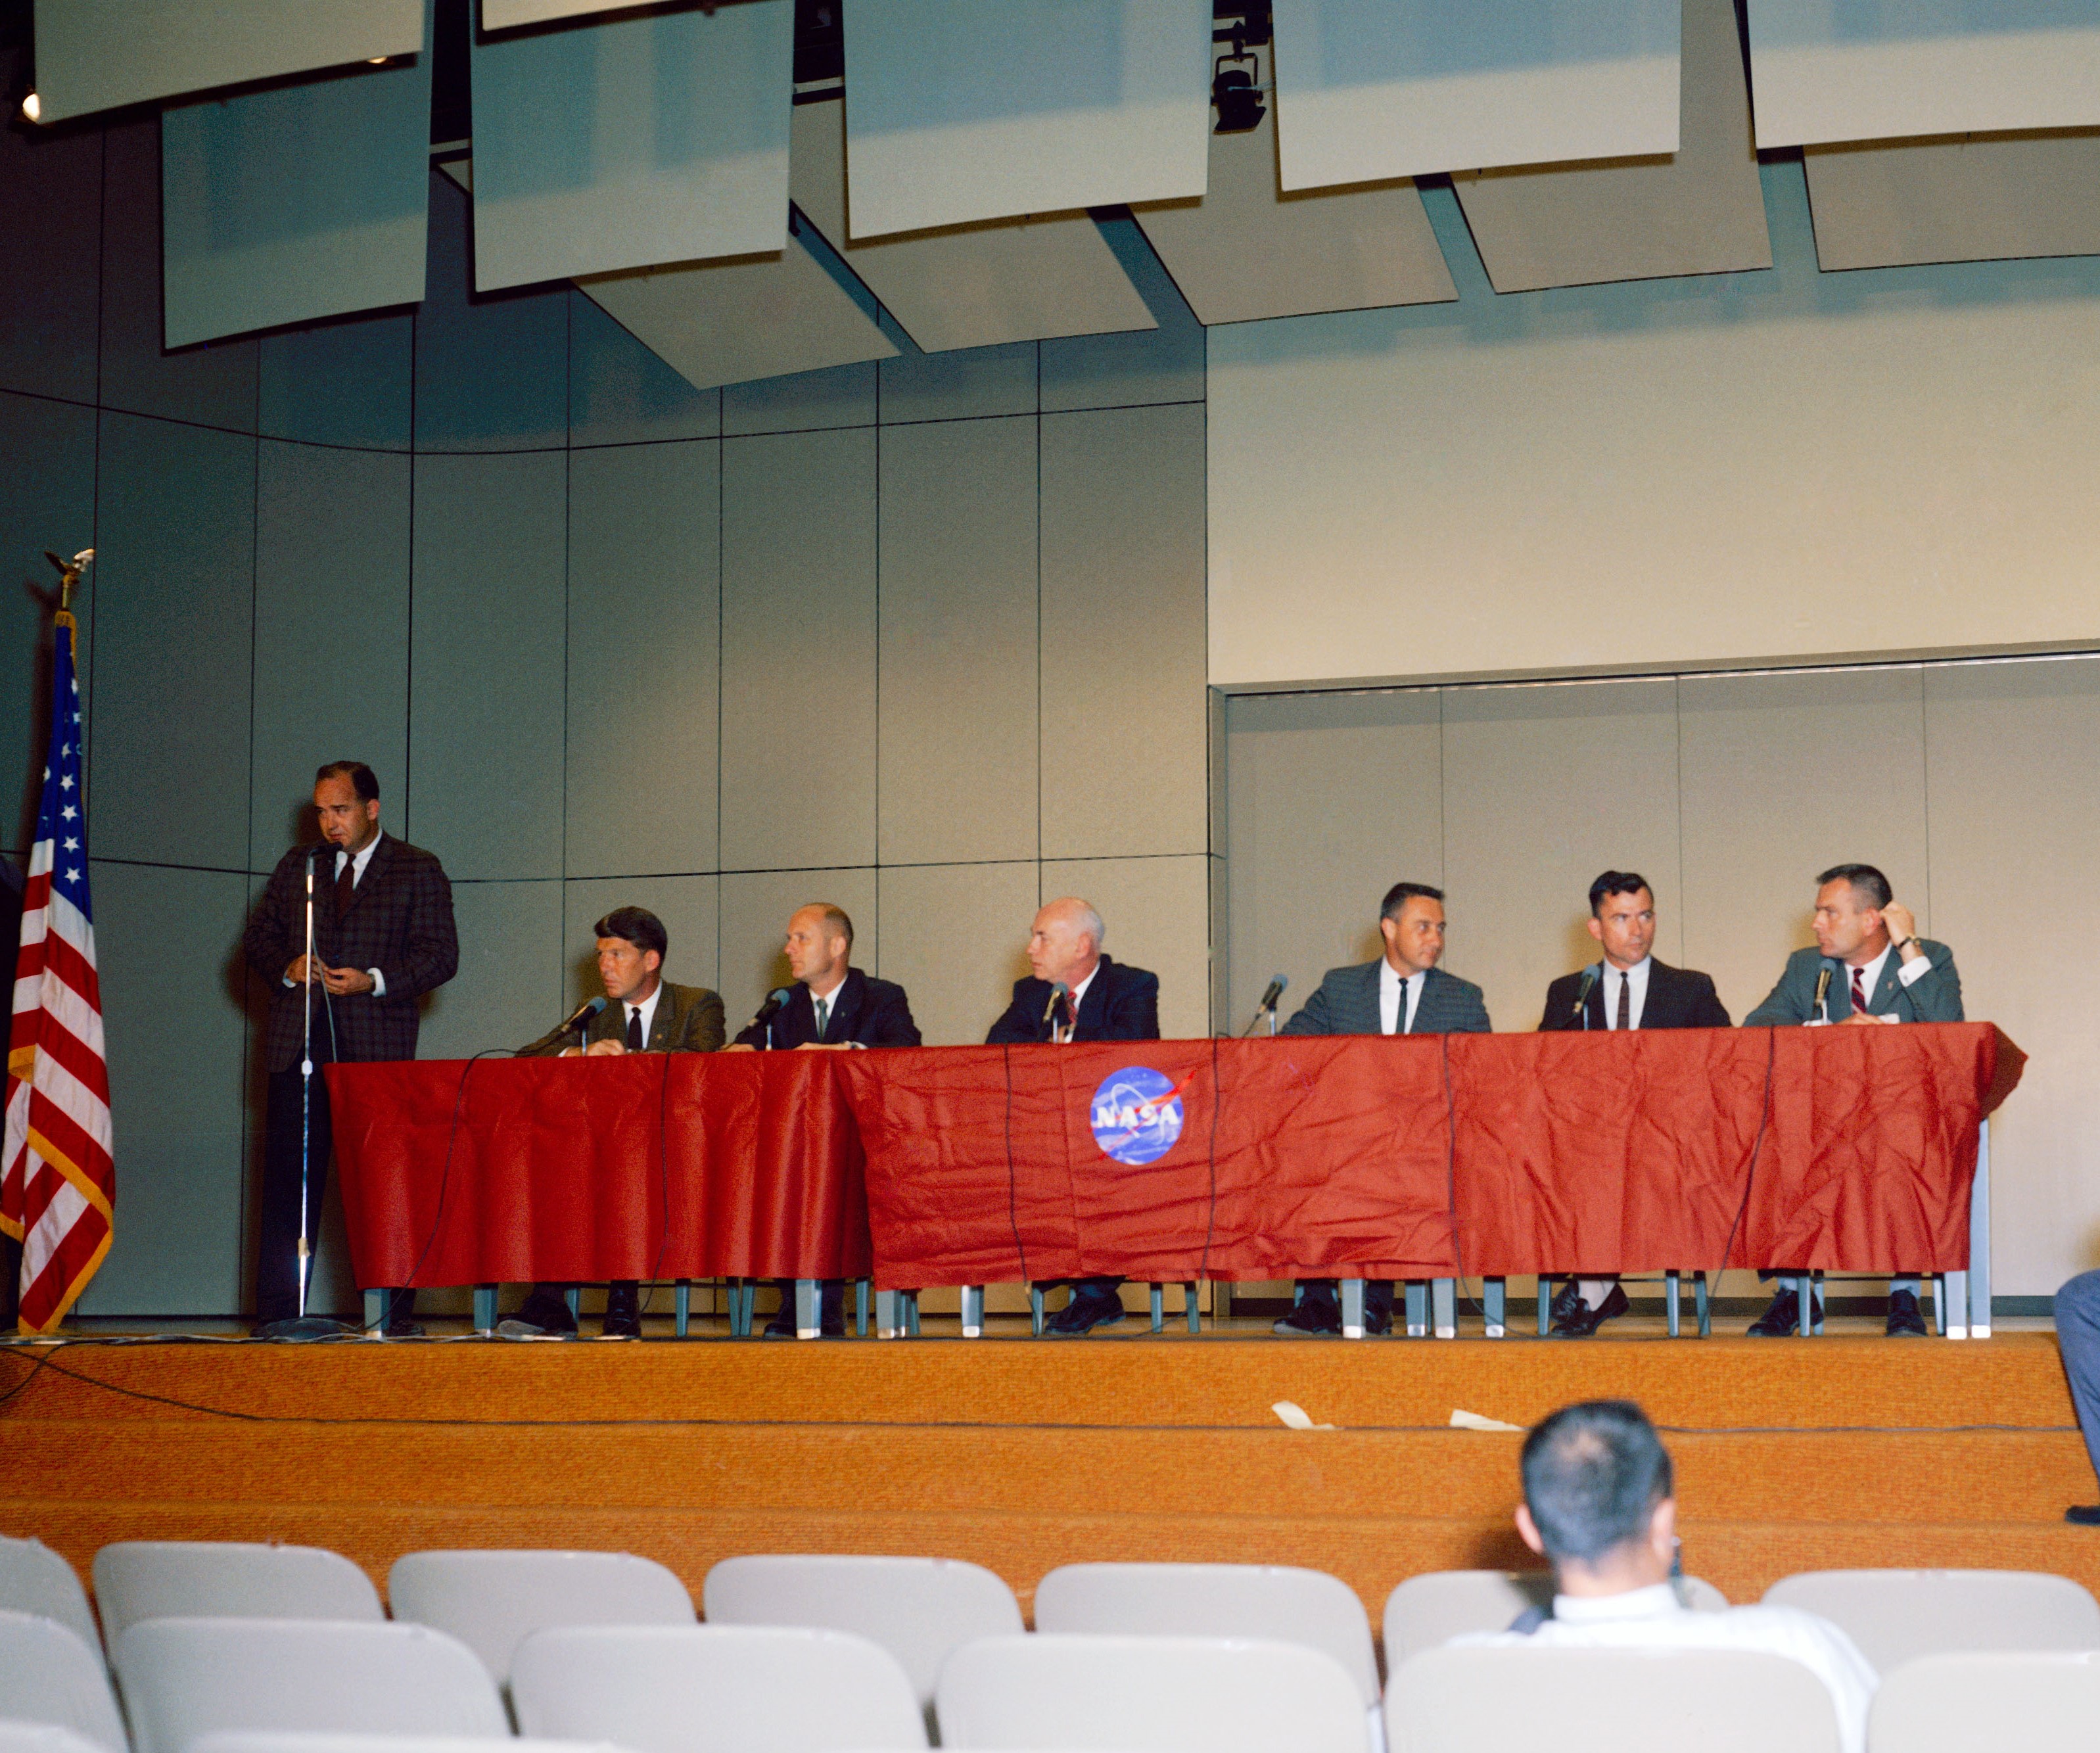 In the auditorium of the Manned Spacecraft Center (MSC), now NASA’s Johnson Space Center in Houston, MSC Director Robert R. Gilruth introduces the Gemini 3 crew to the press